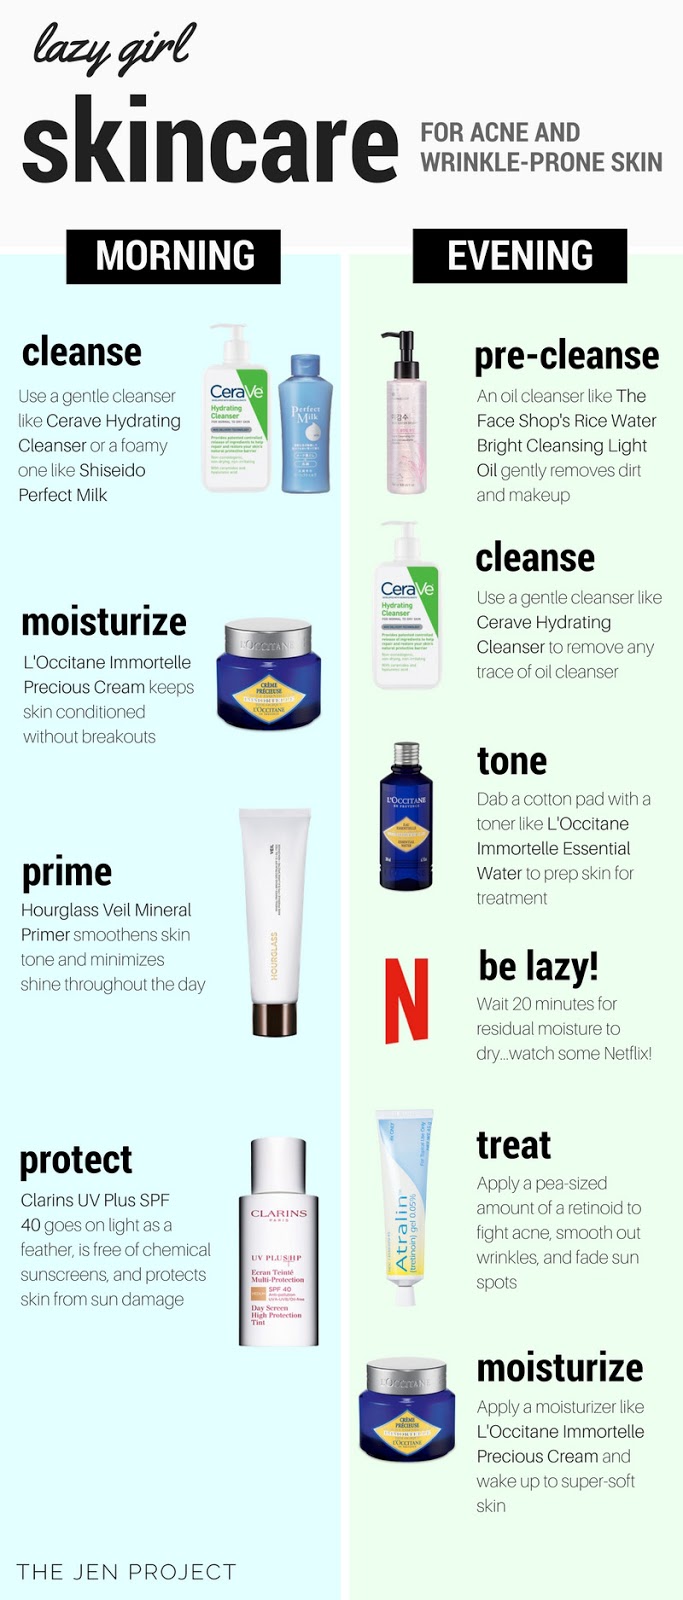 The lazy girl skincare regimen: An easy-peasy, no-nonsense skincare routine for acne and/or wrinkle-prone skin. From The Jen Project - a skincare blog for busy people. Visit thejenproject.com